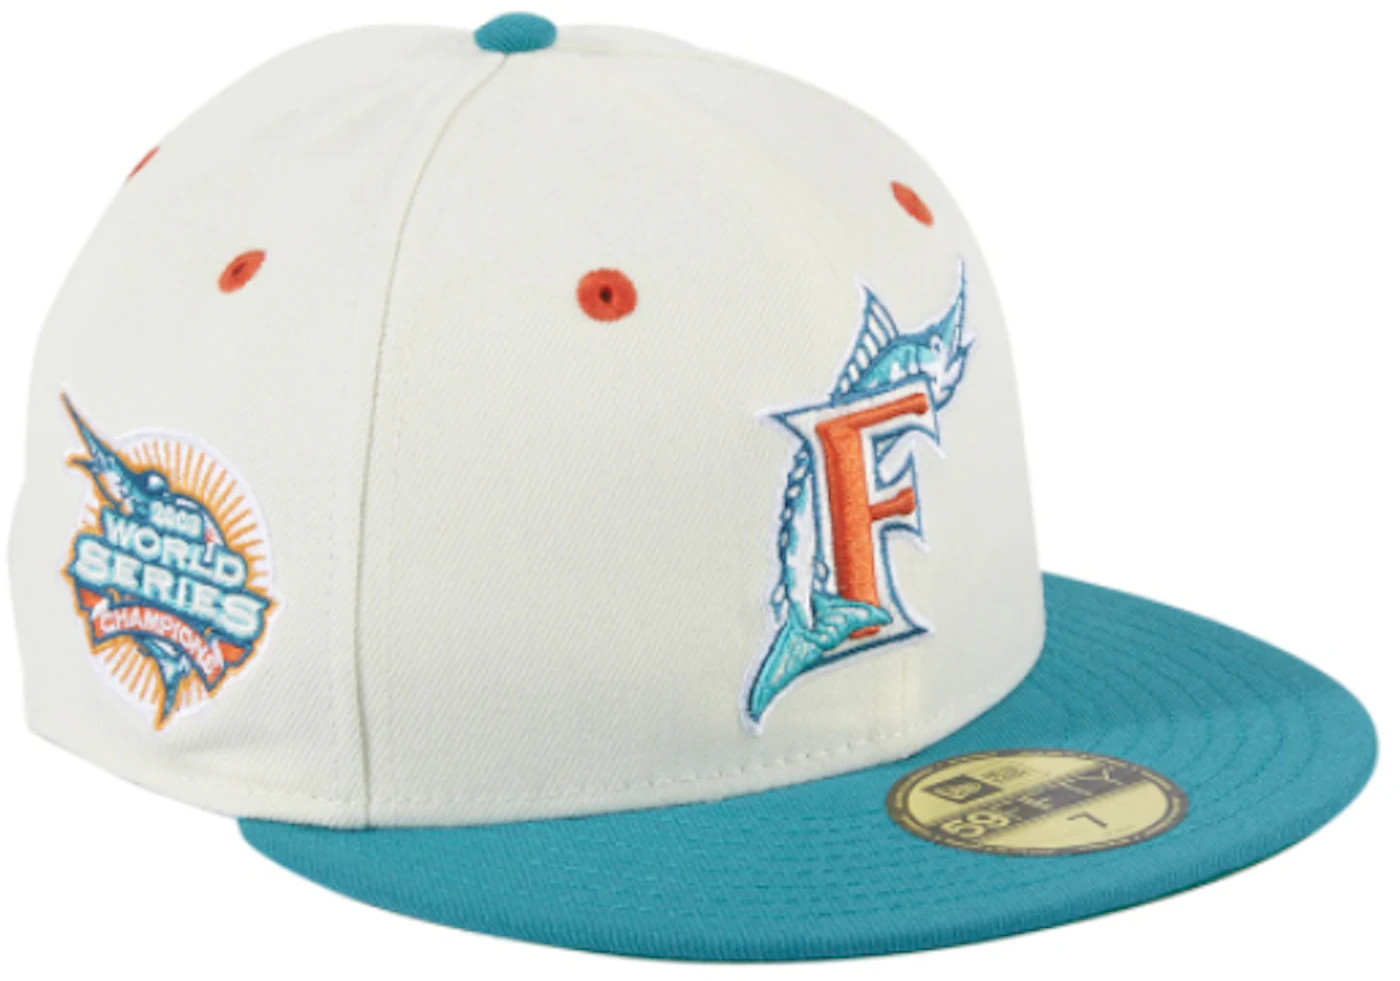 Marlins' teal uniforms back for 30th anniversary